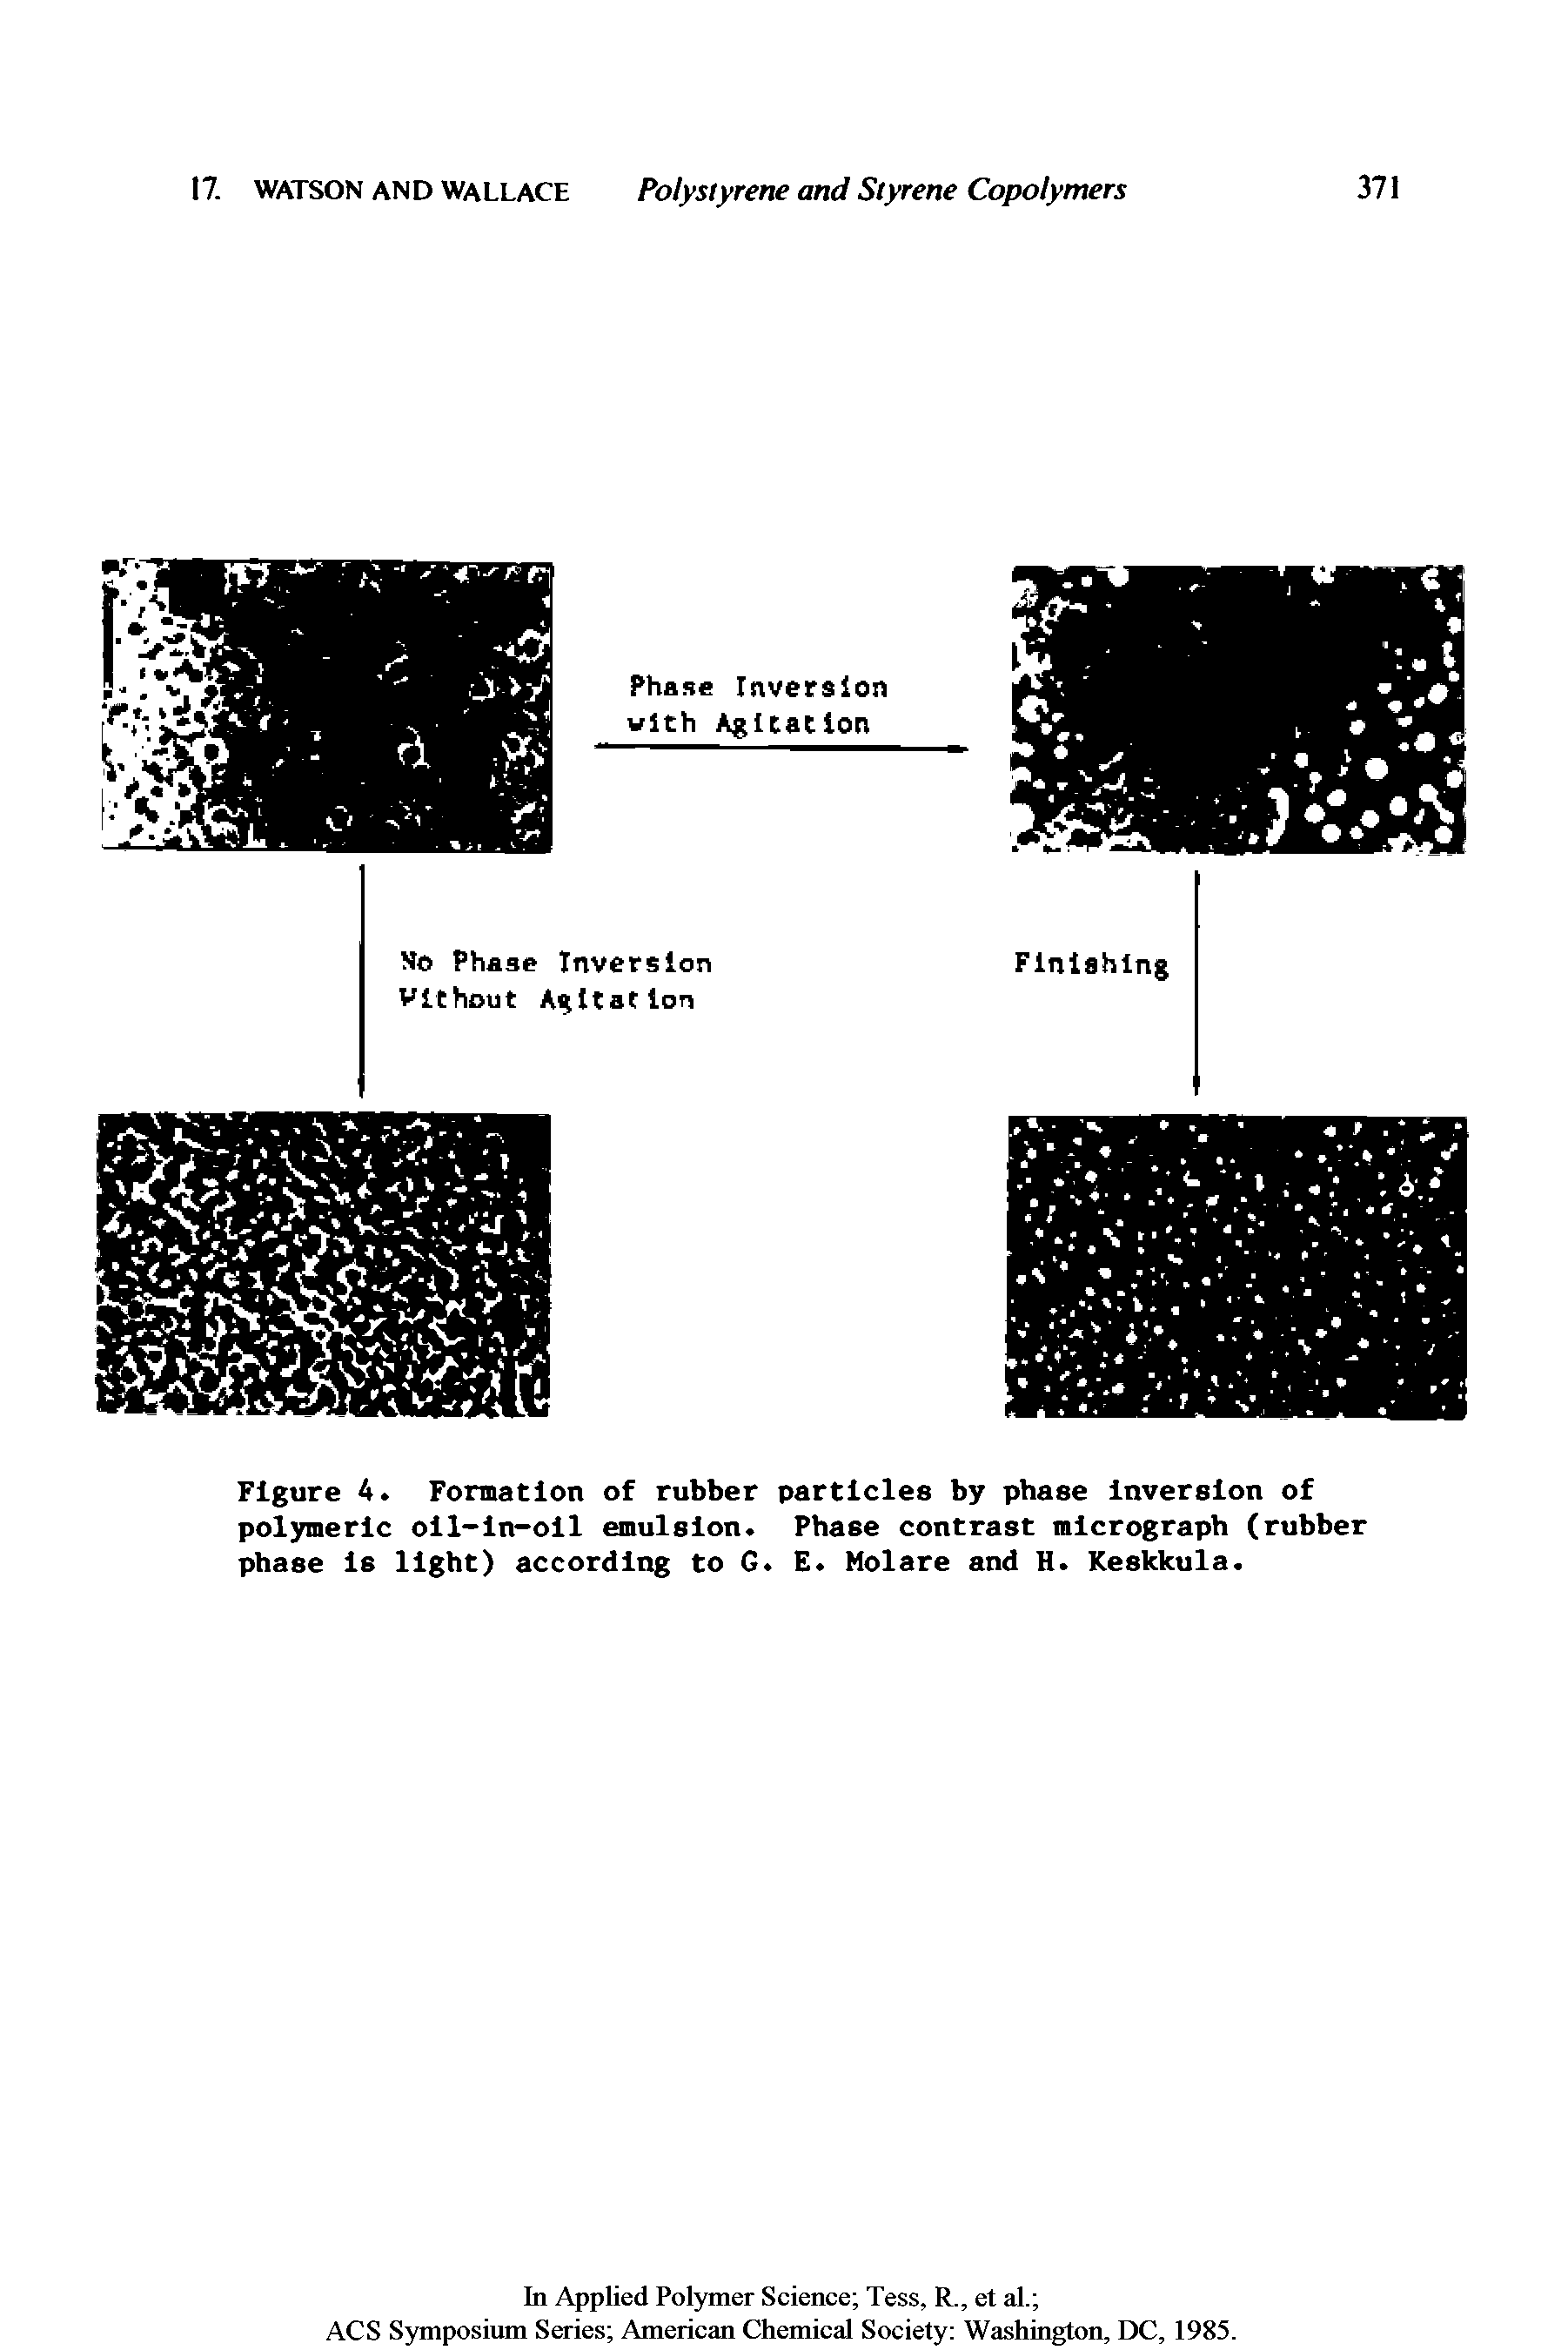 Figure A. Formation of rubber particles by phase Inversion of polymeric oil-in-oil emulsion. Phase contrast micrograph (rubber phase is light) according to G. E. Molare and H. Keskkula.